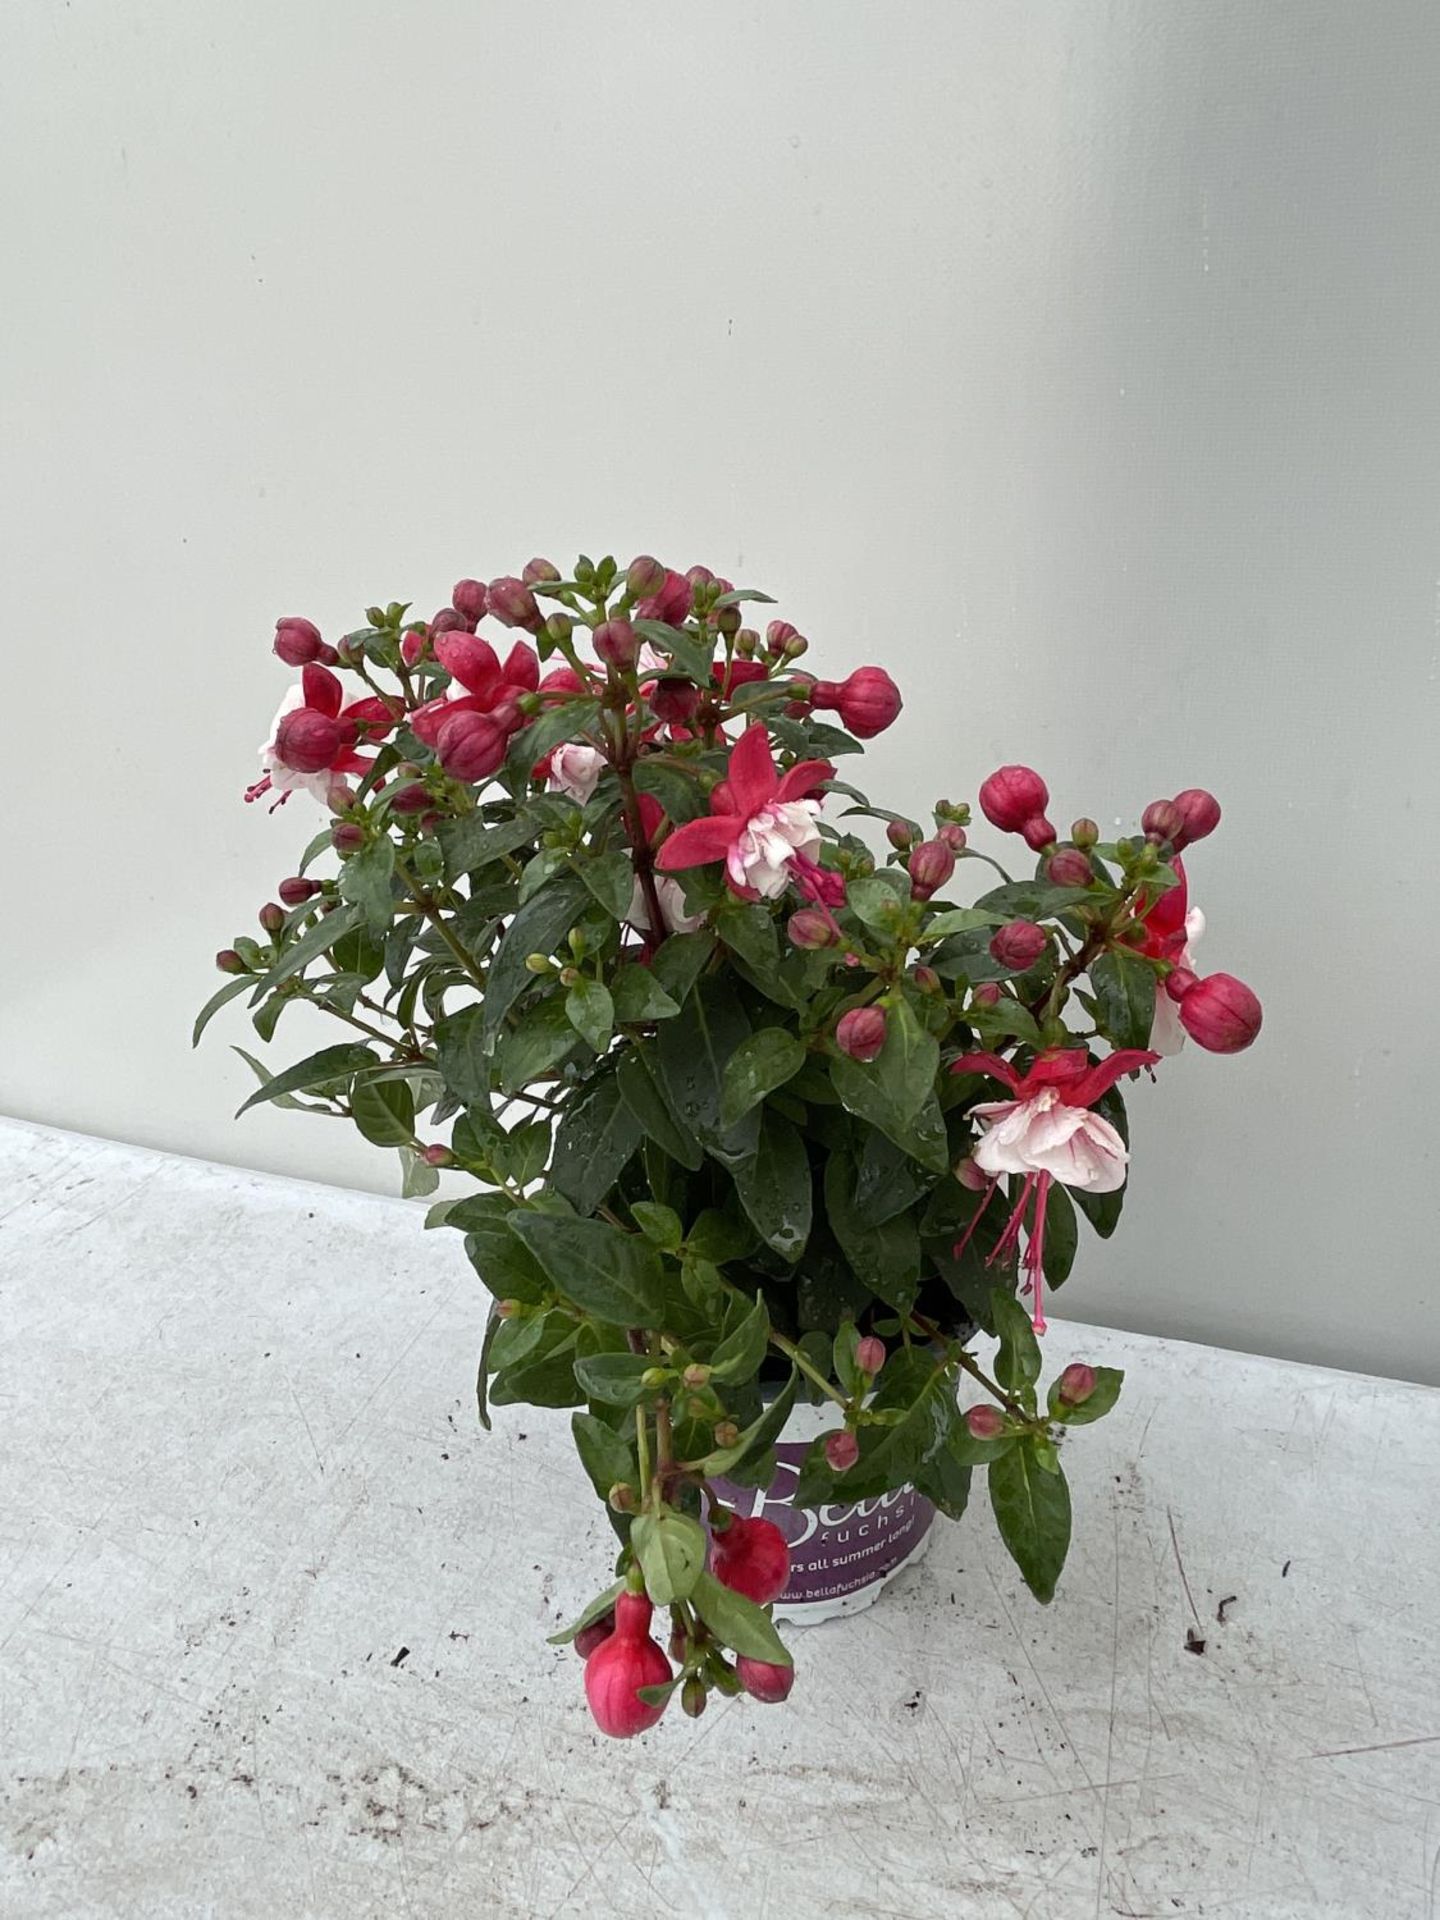 NINE FUCHSIA BELLA IN 20CM POTS 20-30CM TALL TO BE SOLD FOR THE NINE PLUS VAT - Image 3 of 5